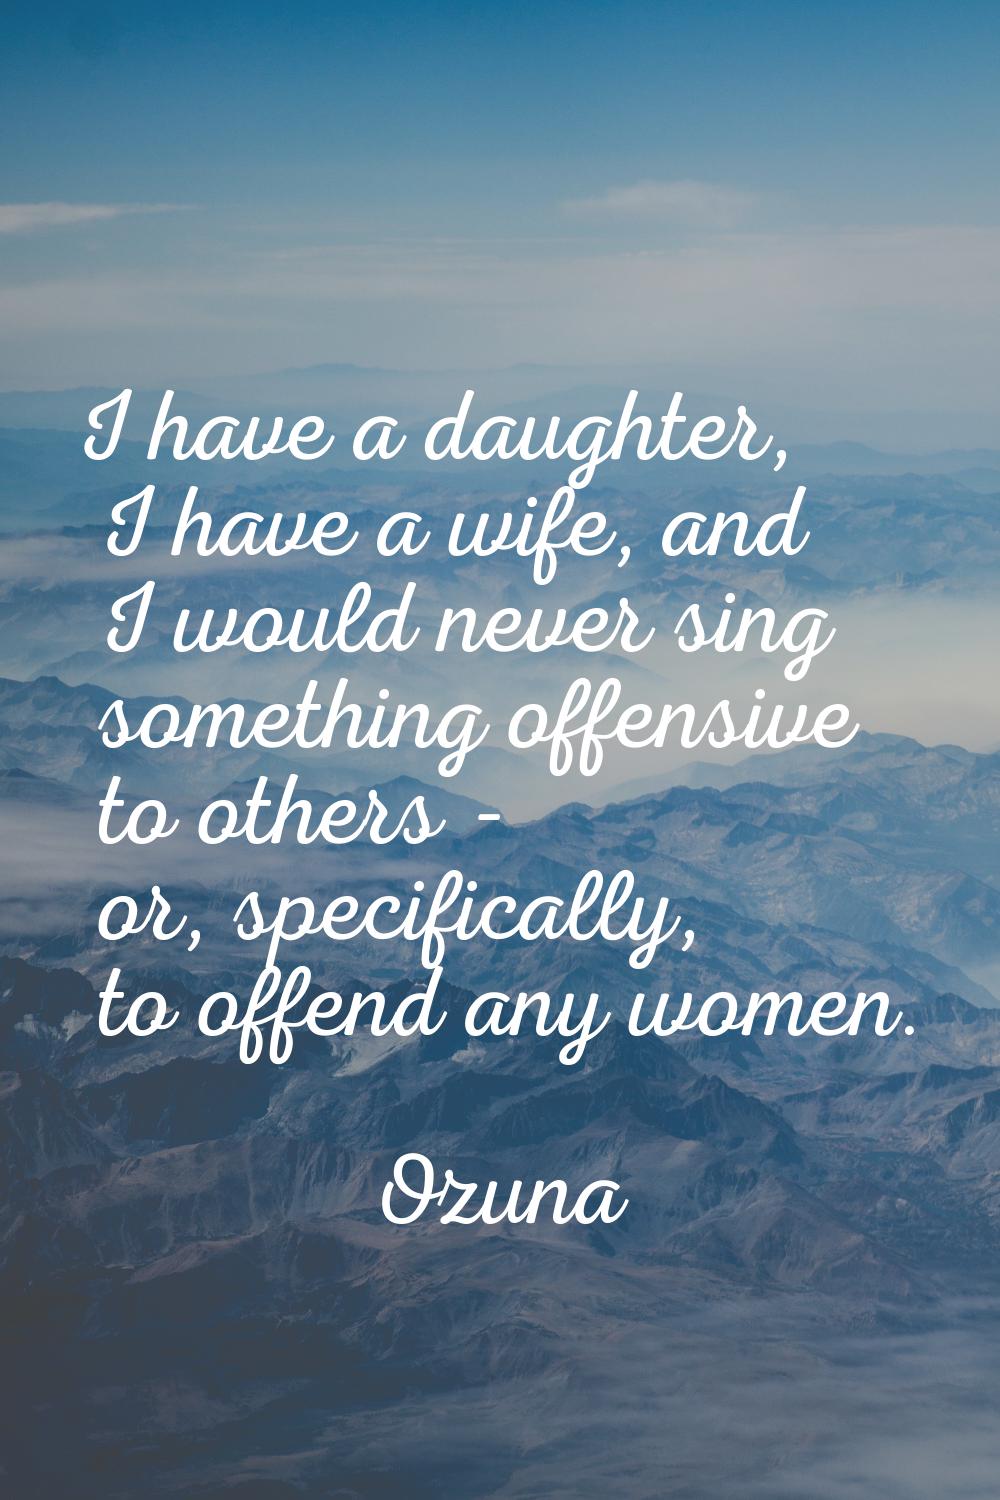 I have a daughter, I have a wife, and I would never sing something offensive to others - or, specif